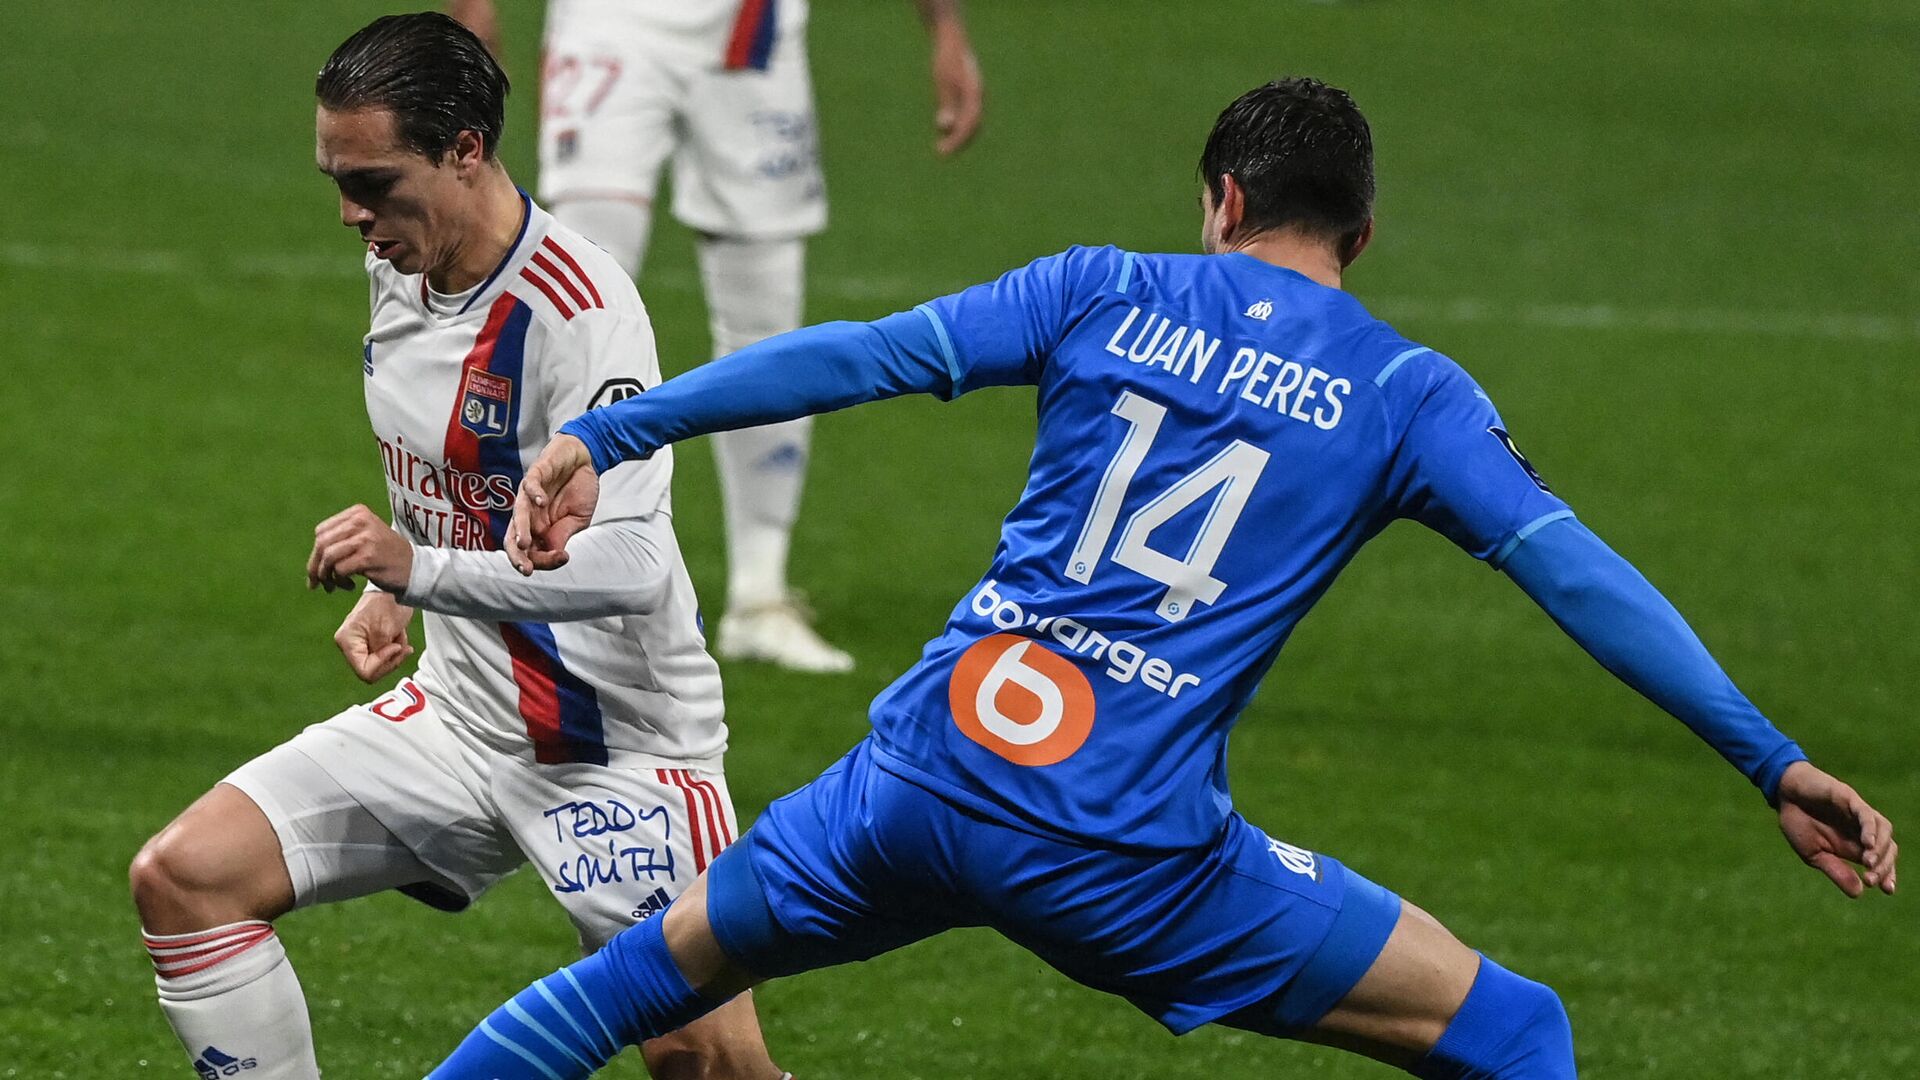 Lyon’s French midfielder Maxence Caqueret (L) fights for the ball with Marseille's Brazilian defender Luan Peres during the French L1 football match between Olympique Lyonnais (OL) and Marseille at The Groupama Stadium in Decines-Charpieu, central-eastern France, on February 1, 2022. (Photo by OLIVIER CHASSIGNOLE / AFP) - РИА Новости, 1920, 02.02.2022